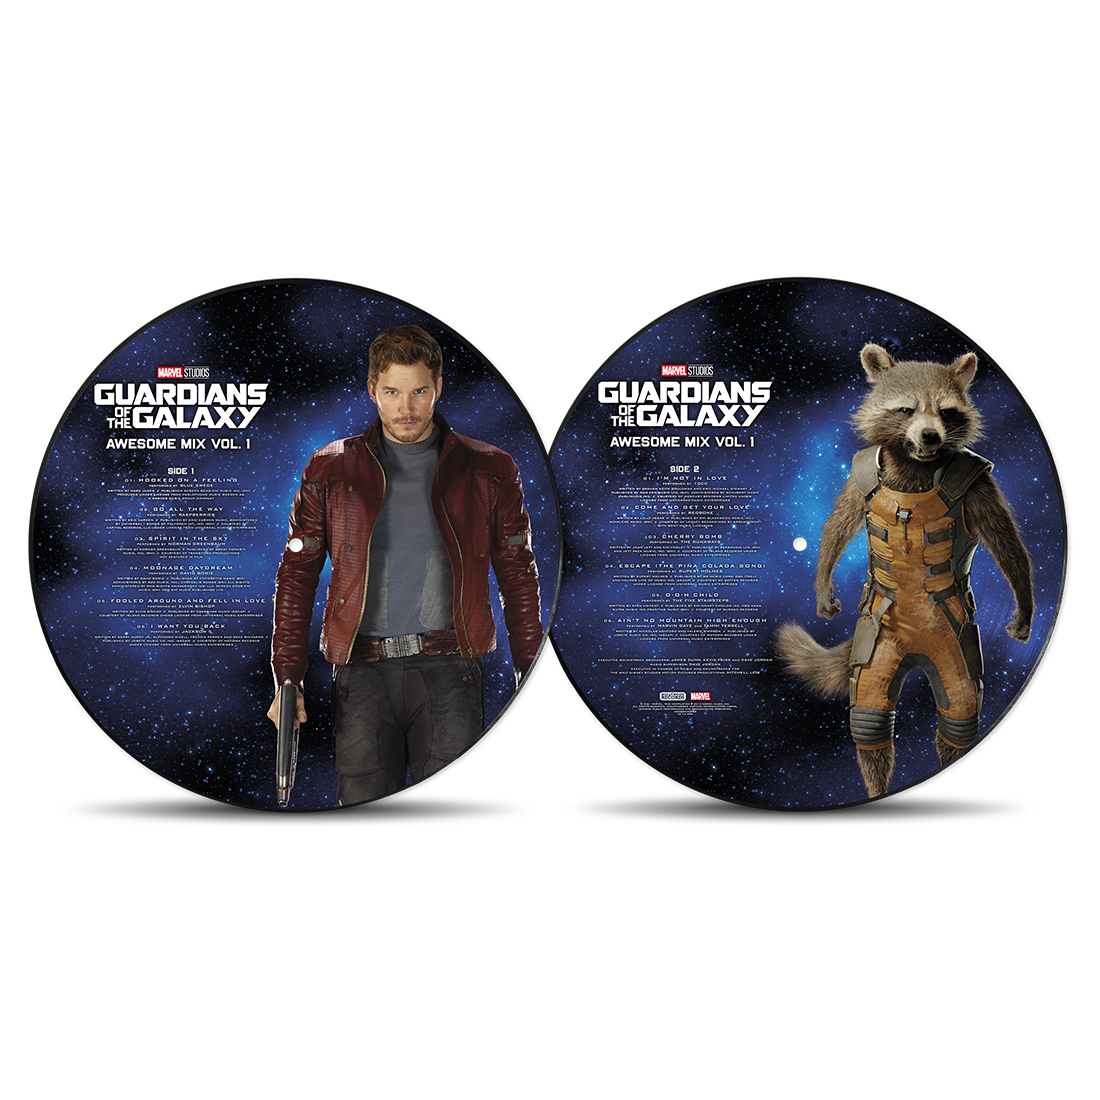 Various Artists - Guardians of the Galaxy: Awesome Mix Vol. 1 Vinyl Edition:  Limited Picture Disc LP